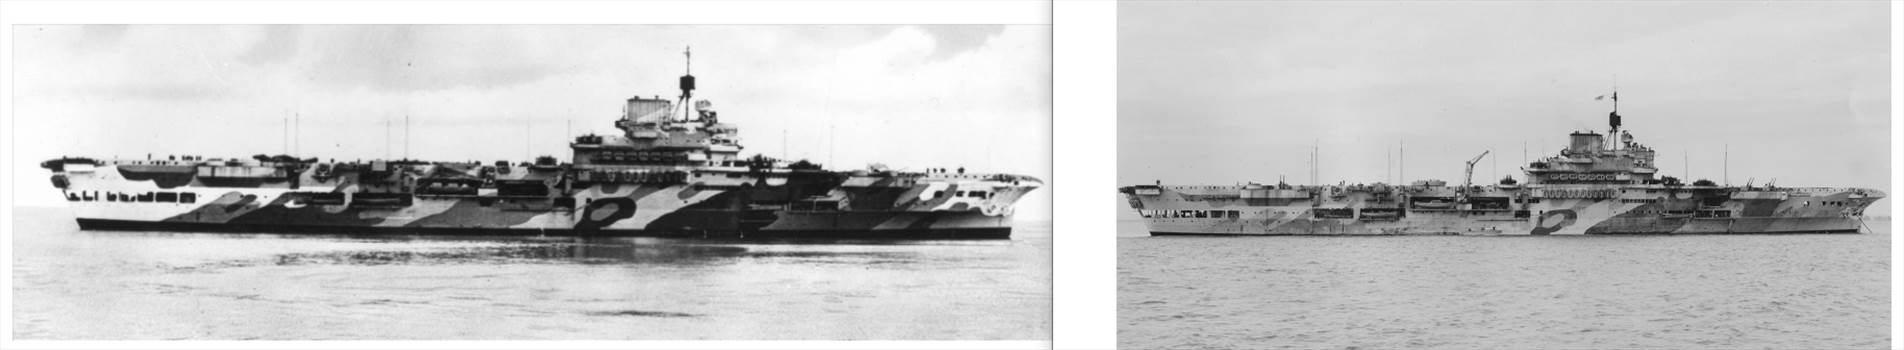 Starboard Comparison.png - 